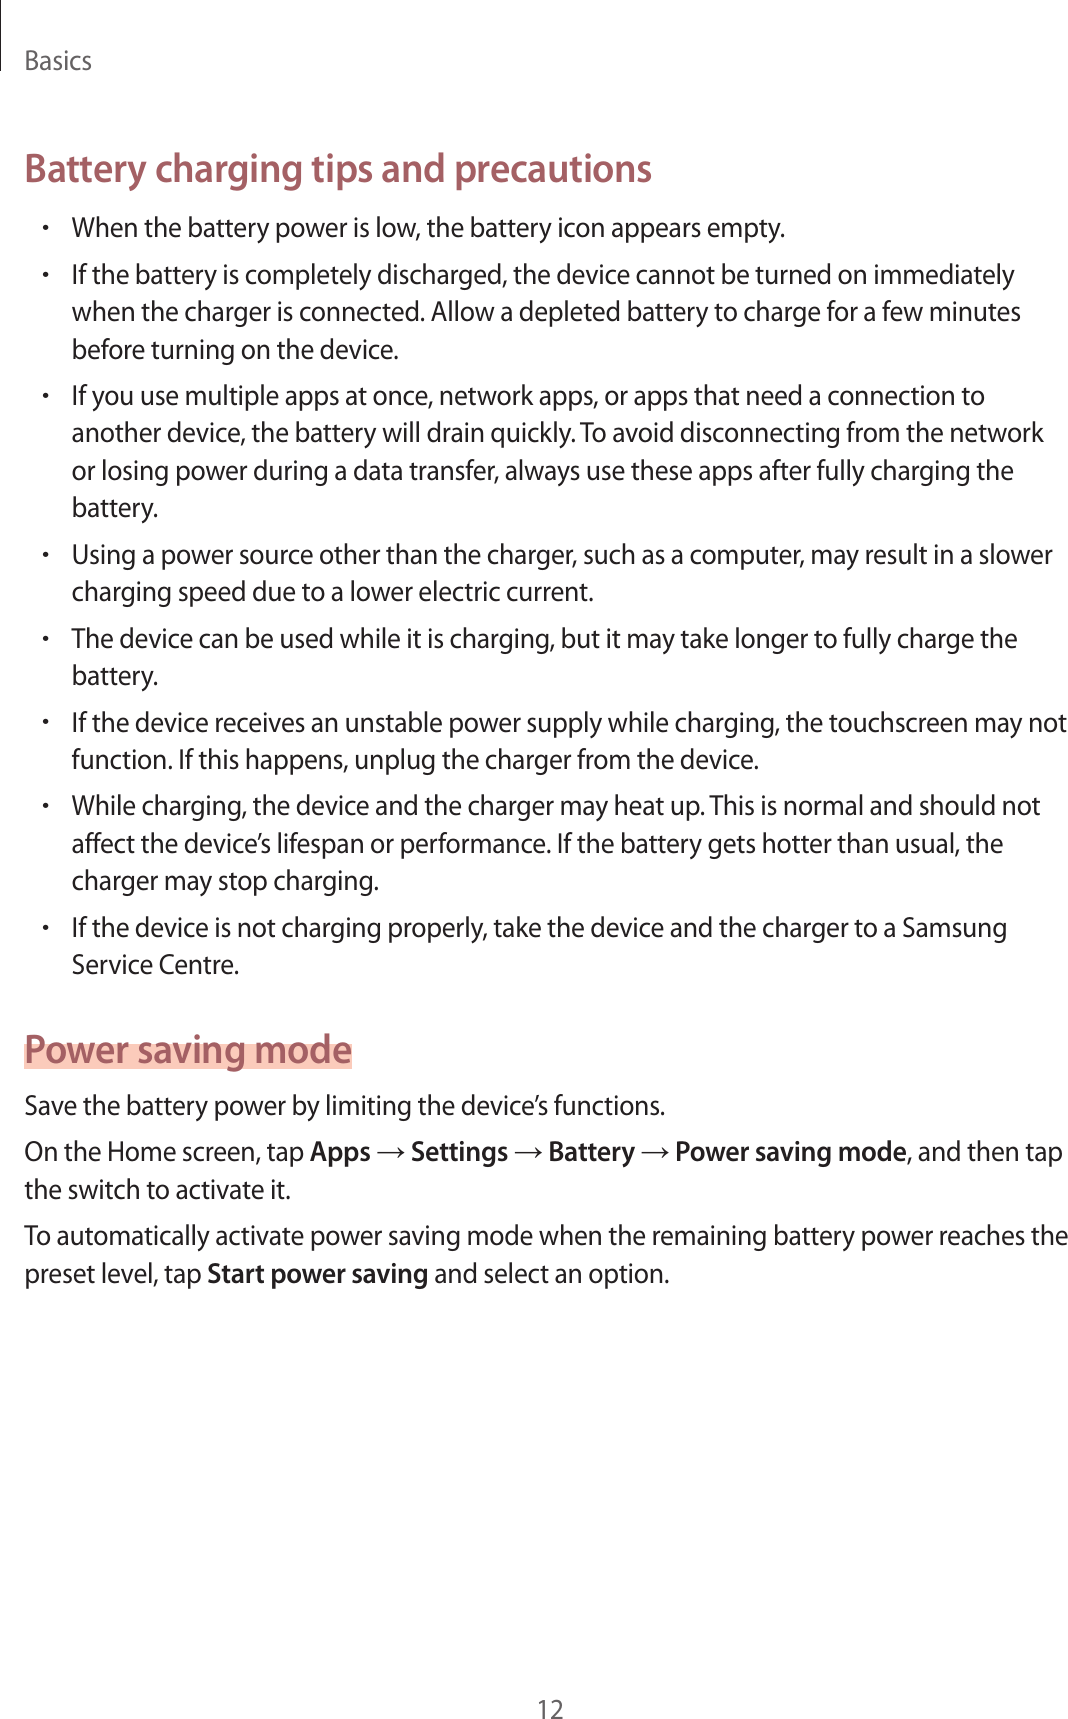 Basics12Battery charging tips and precautions•When the battery power is low, the battery icon appears empty.•If the battery is completely discharged, the device cannot be turned on immediately when the charger is connected. Allow a depleted battery to charge for a few minutes before turning on the device.•If you use multiple apps at once, network apps, or apps that need a connection to another device, the battery will drain quickly. To avoid disconnecting from the network or losing power during a data transfer, always use these apps after fully charging the battery.•Using a power source other than the charger, such as a computer, may result in a slower charging speed due to a lower electric current.•The device can be used while it is charging, but it may take longer to fully charge the battery.•If the device receives an unstable power supply while charging, the touchscreen may not function. If this happens, unplug the charger from the device.•While charging, the device and the charger may heat up. This is normal and should not affect the device’s lifespan or performance. If the battery gets hotter than usual, the charger may stop charging.•If the device is not charging properly, take the device and the charger to a Samsung Service Centre.Power saving modeSave the battery power by limiting the device’s functions.On the Home screen, tap Apps → Settings → Battery → Power saving mode, and then tap the switch to activate it.To automatically activate power saving mode when the remaining battery power reaches the preset level, tap Start power saving and select an option.